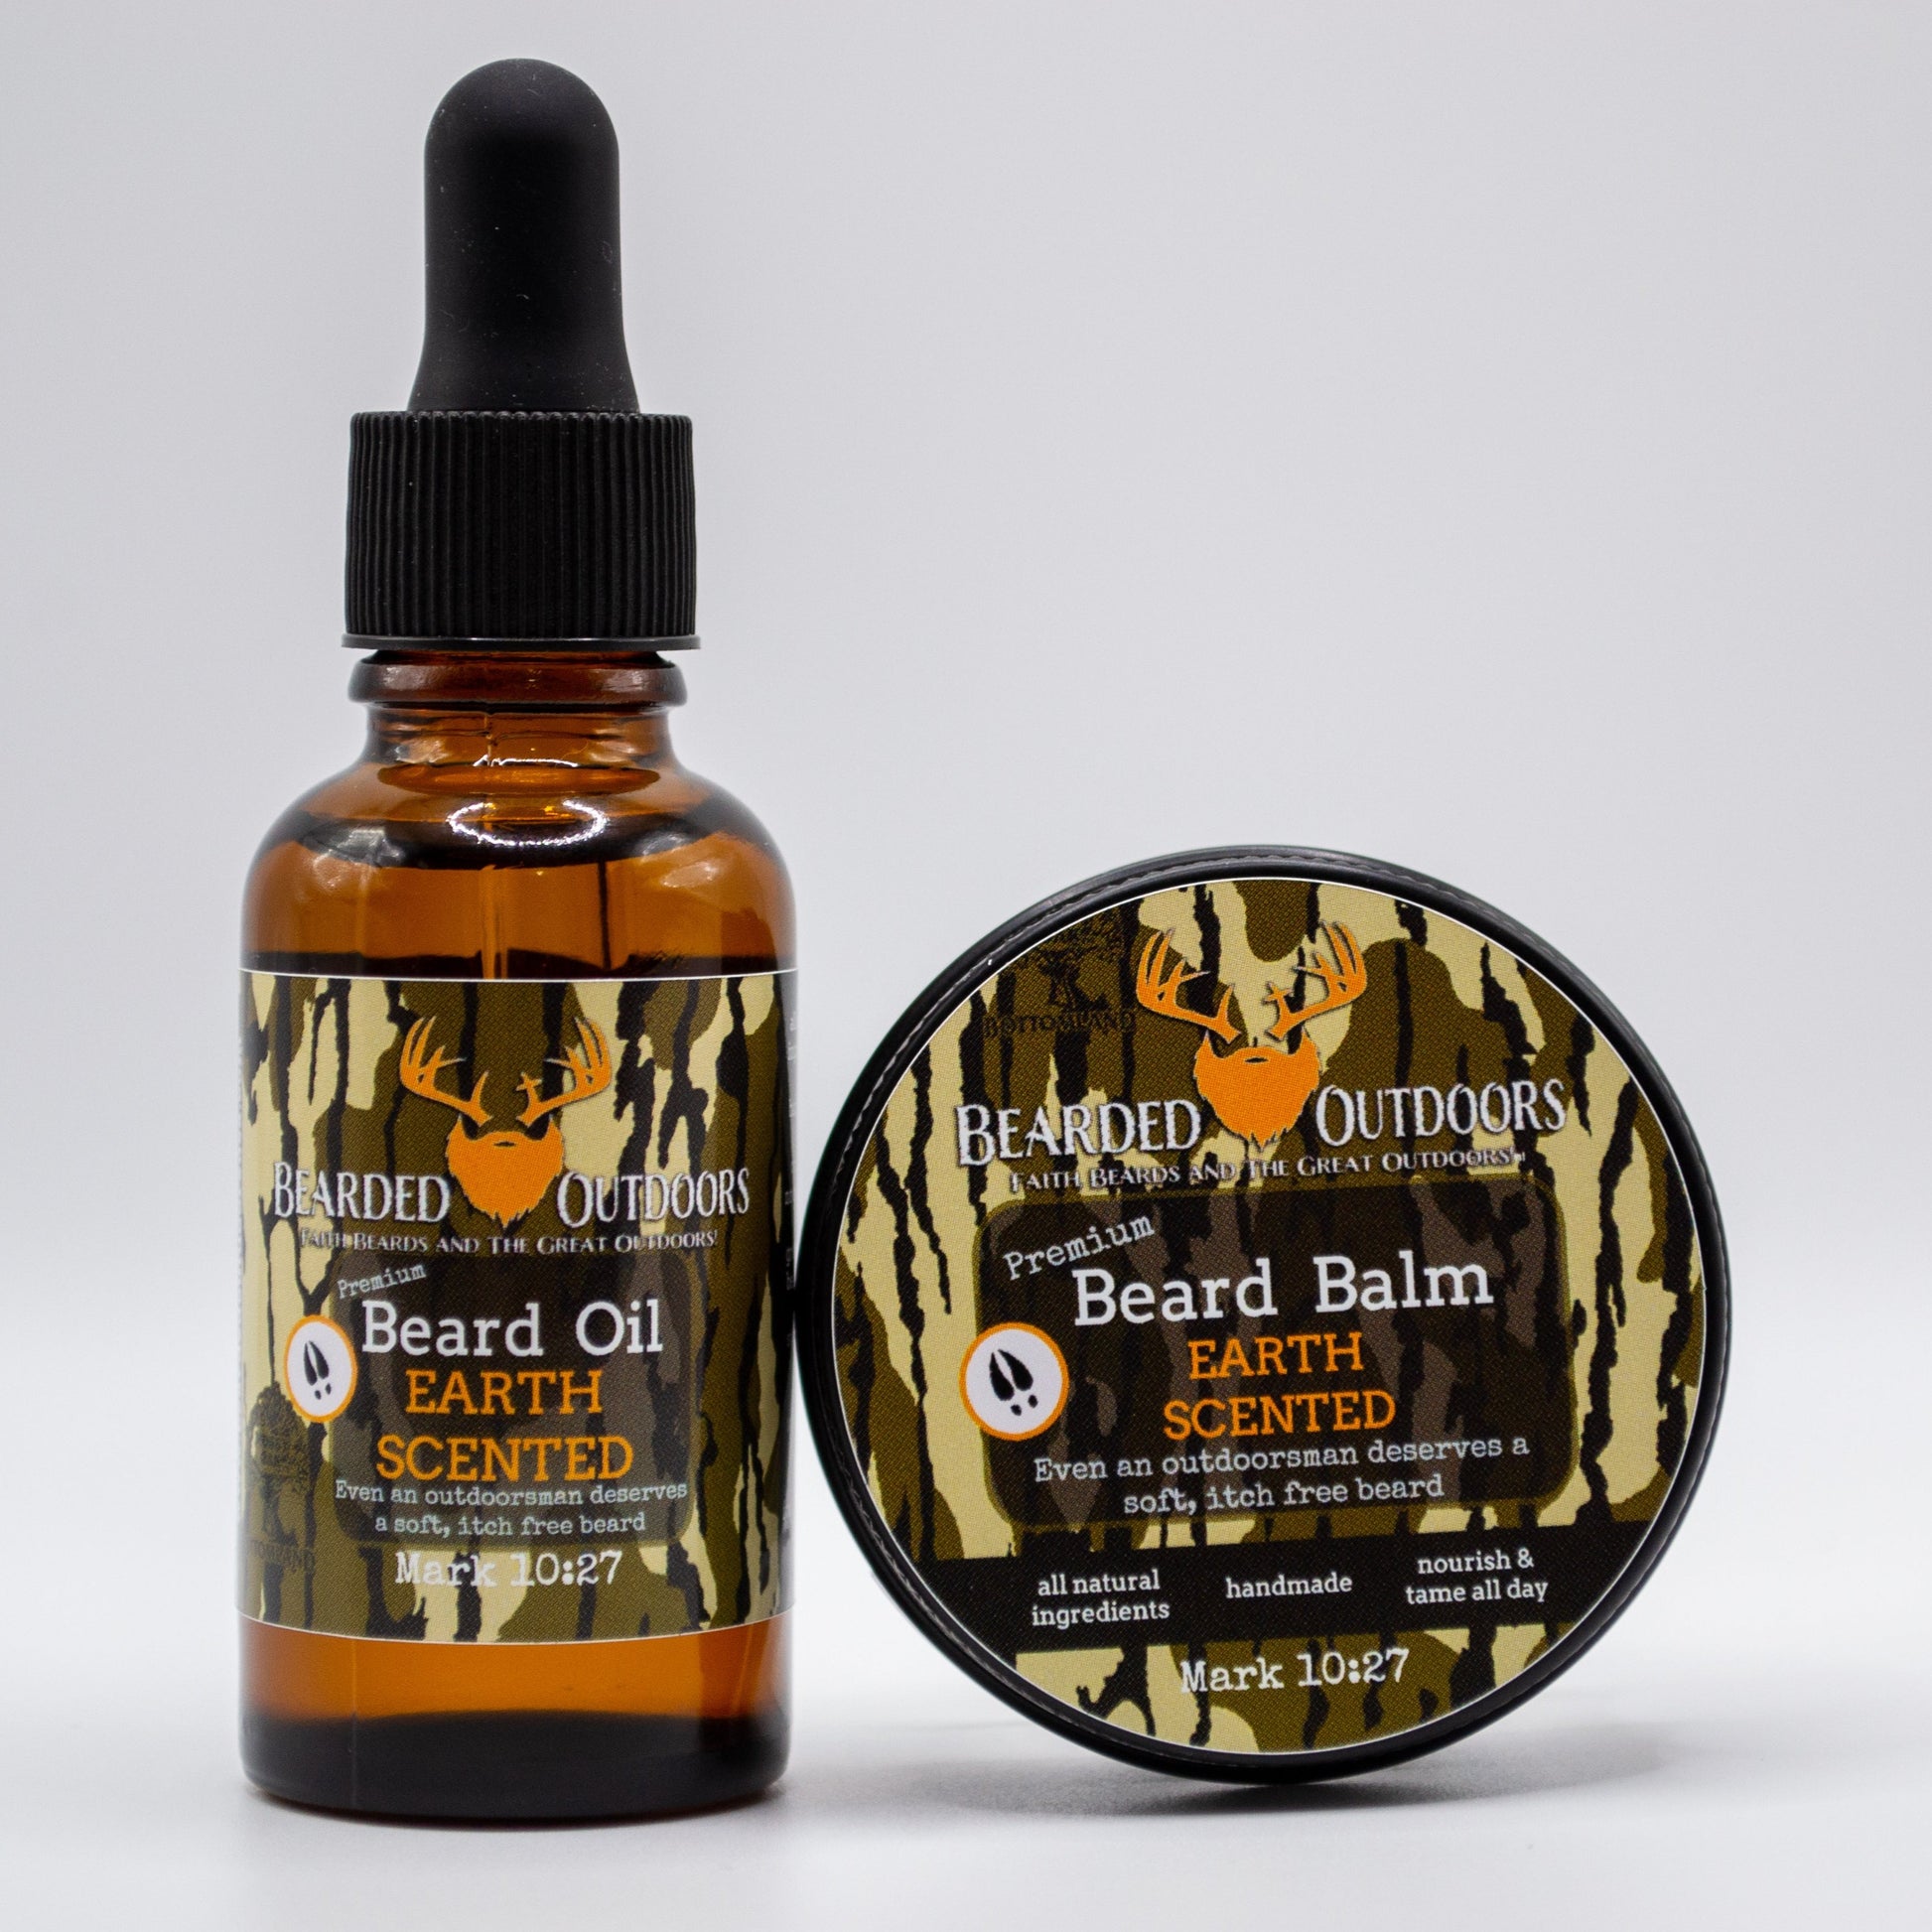 Mossy Oak Earth Scented Premium Beard Oil and Beard Balm wrapped in Bottomland Camo